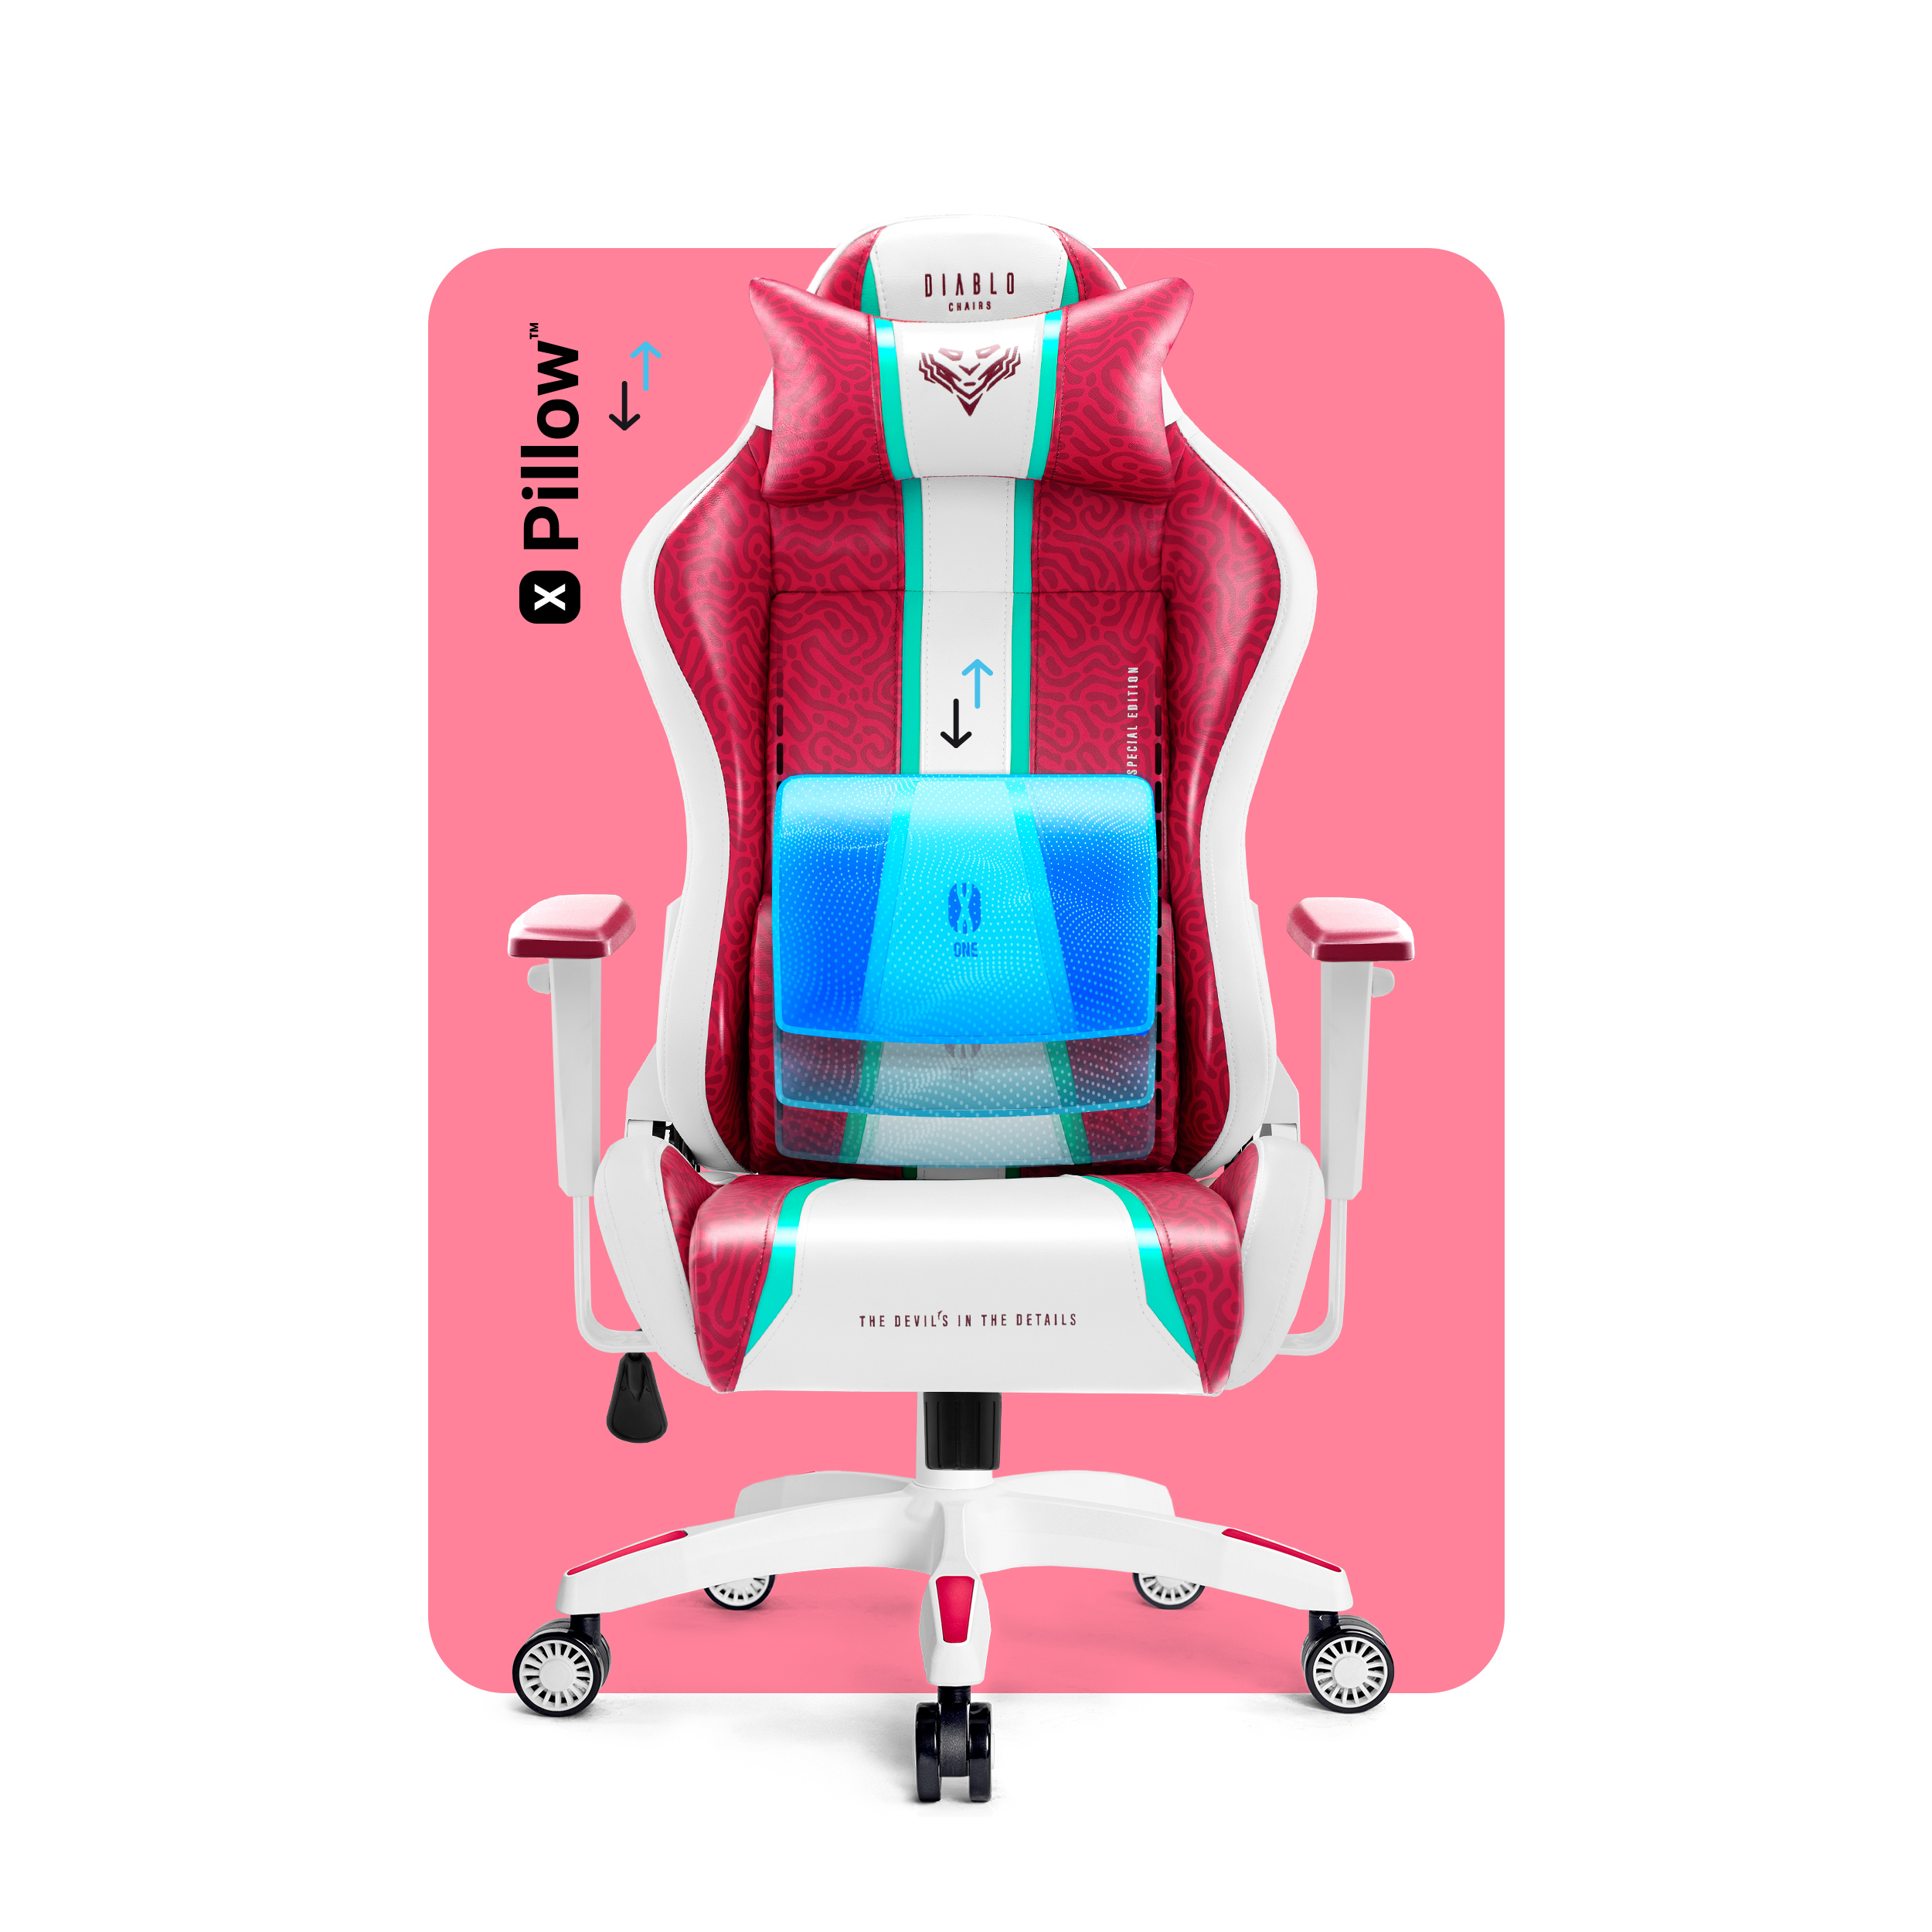 NORMAL CHAIRS Gaming Stuhl, DIABLO Rosa 2.0 CANDY X-ONE